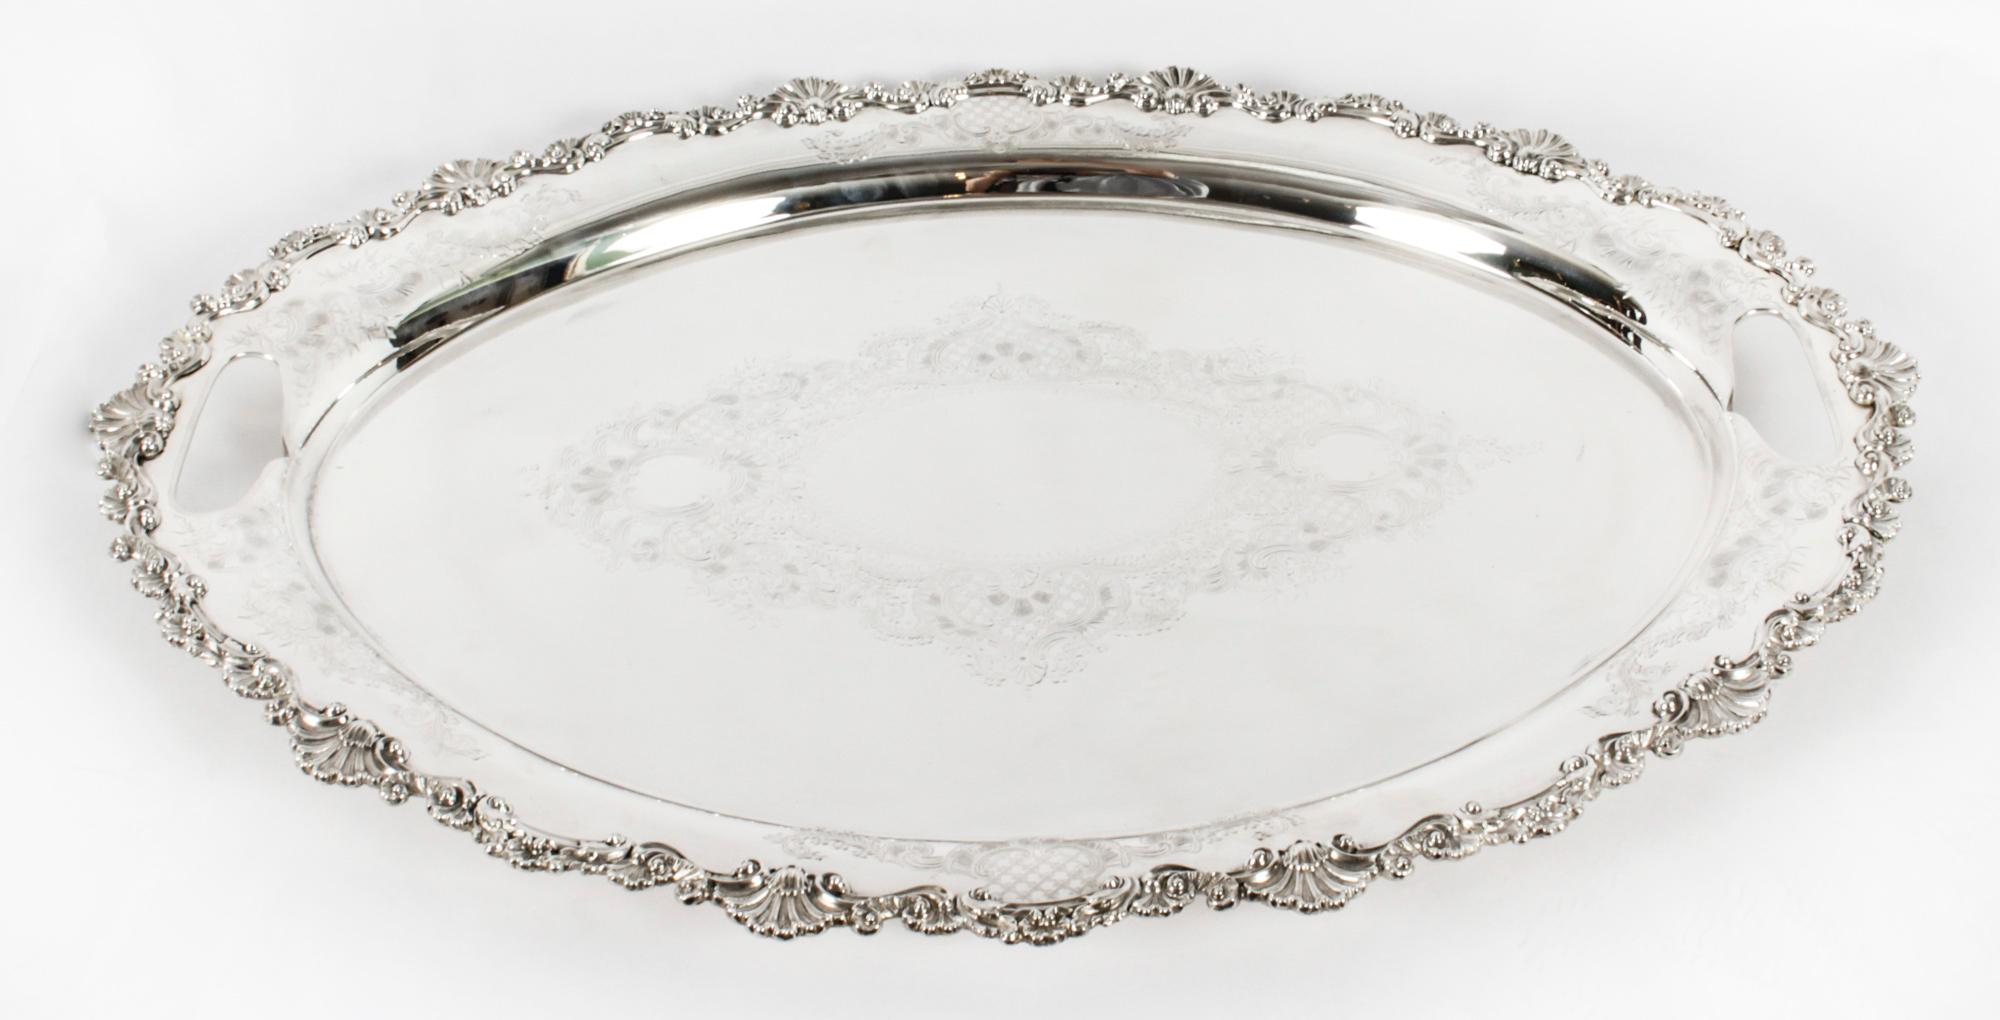 This is a wonderful antique Irish oval silver-plated twin handled tray W. Gibson & Son, Belfast, circa 1870 in date.

This splendid large tray features beautifully engraved floral and foliate decoration. The border and twin handles are embellished